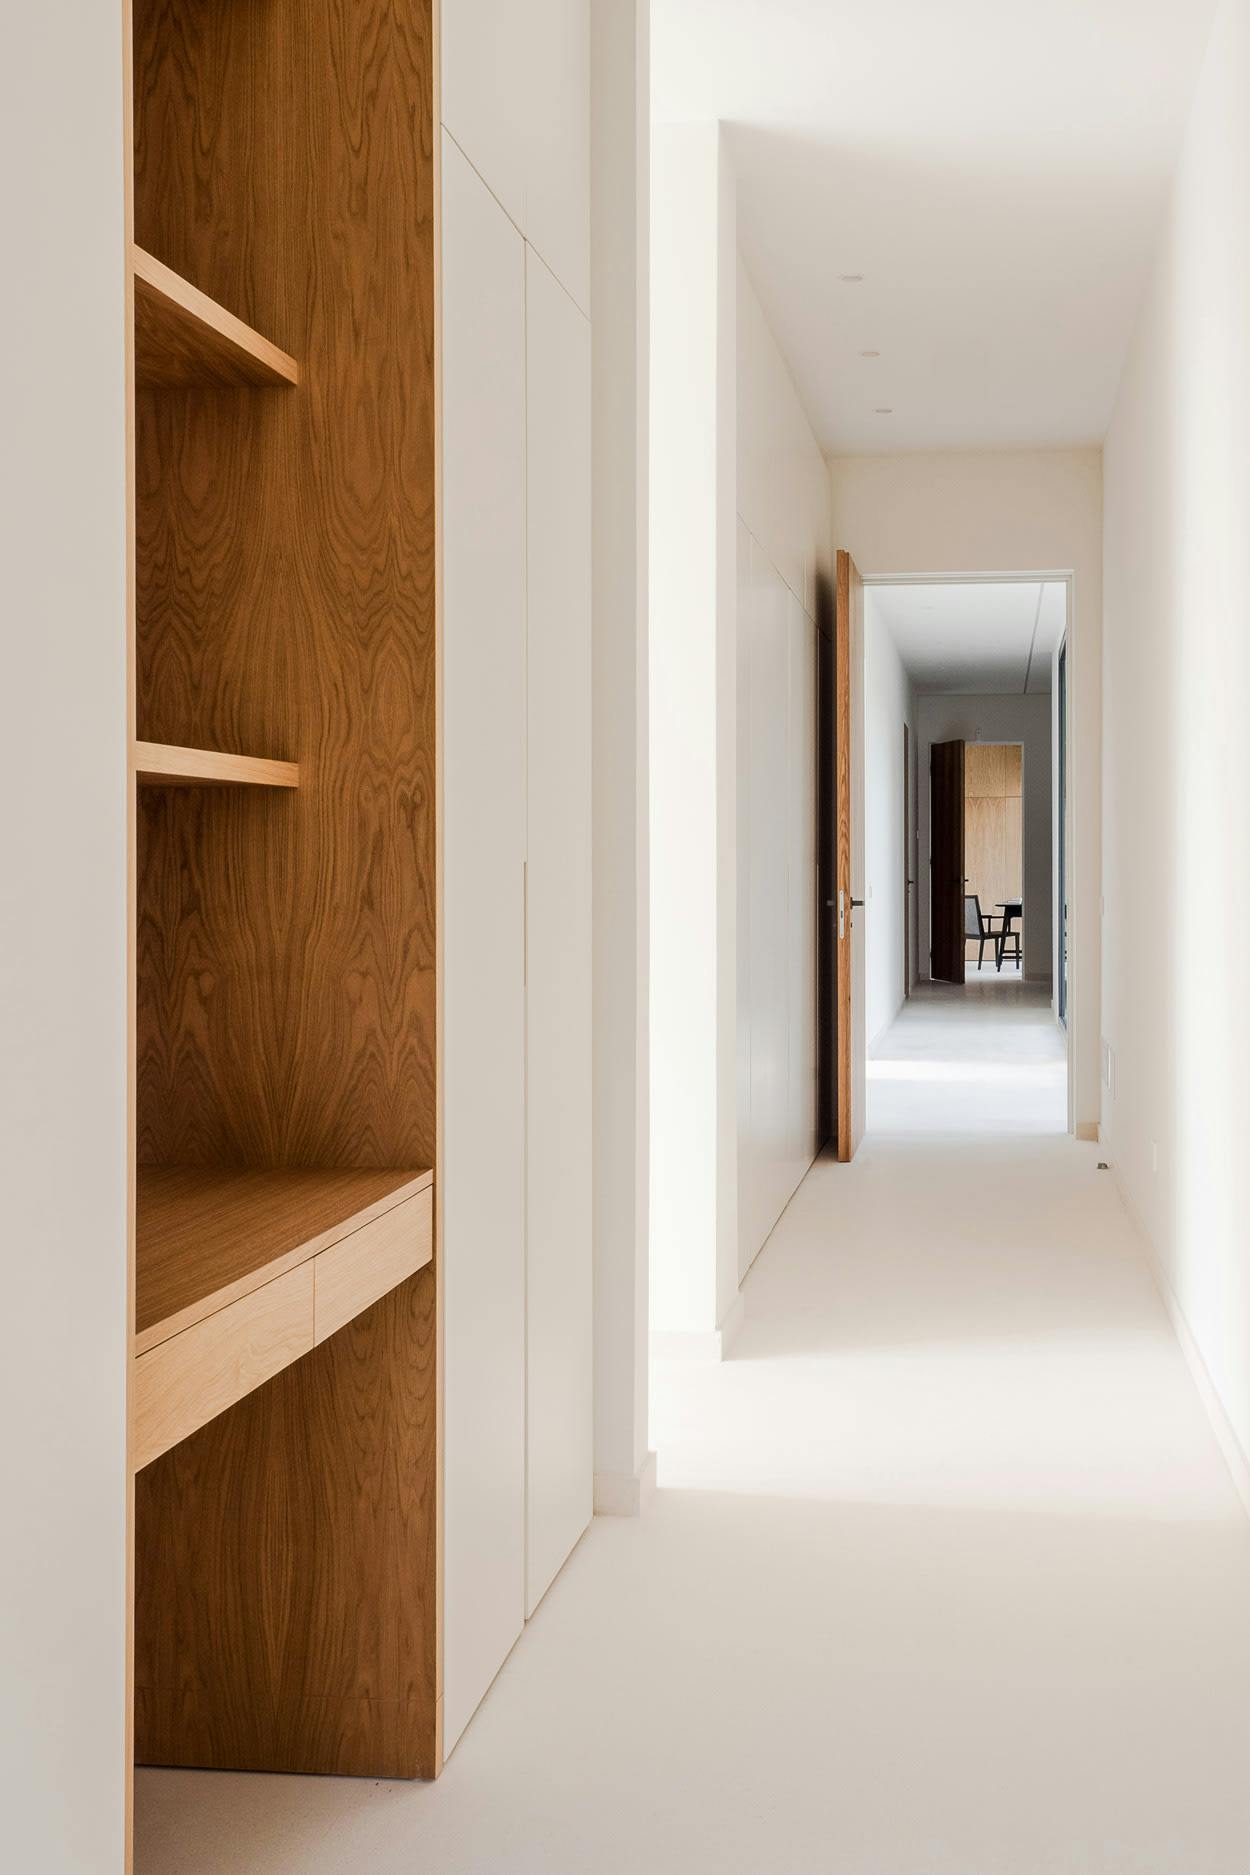 A long, narrow hallway with white walls and wooden doors is shown in the image.